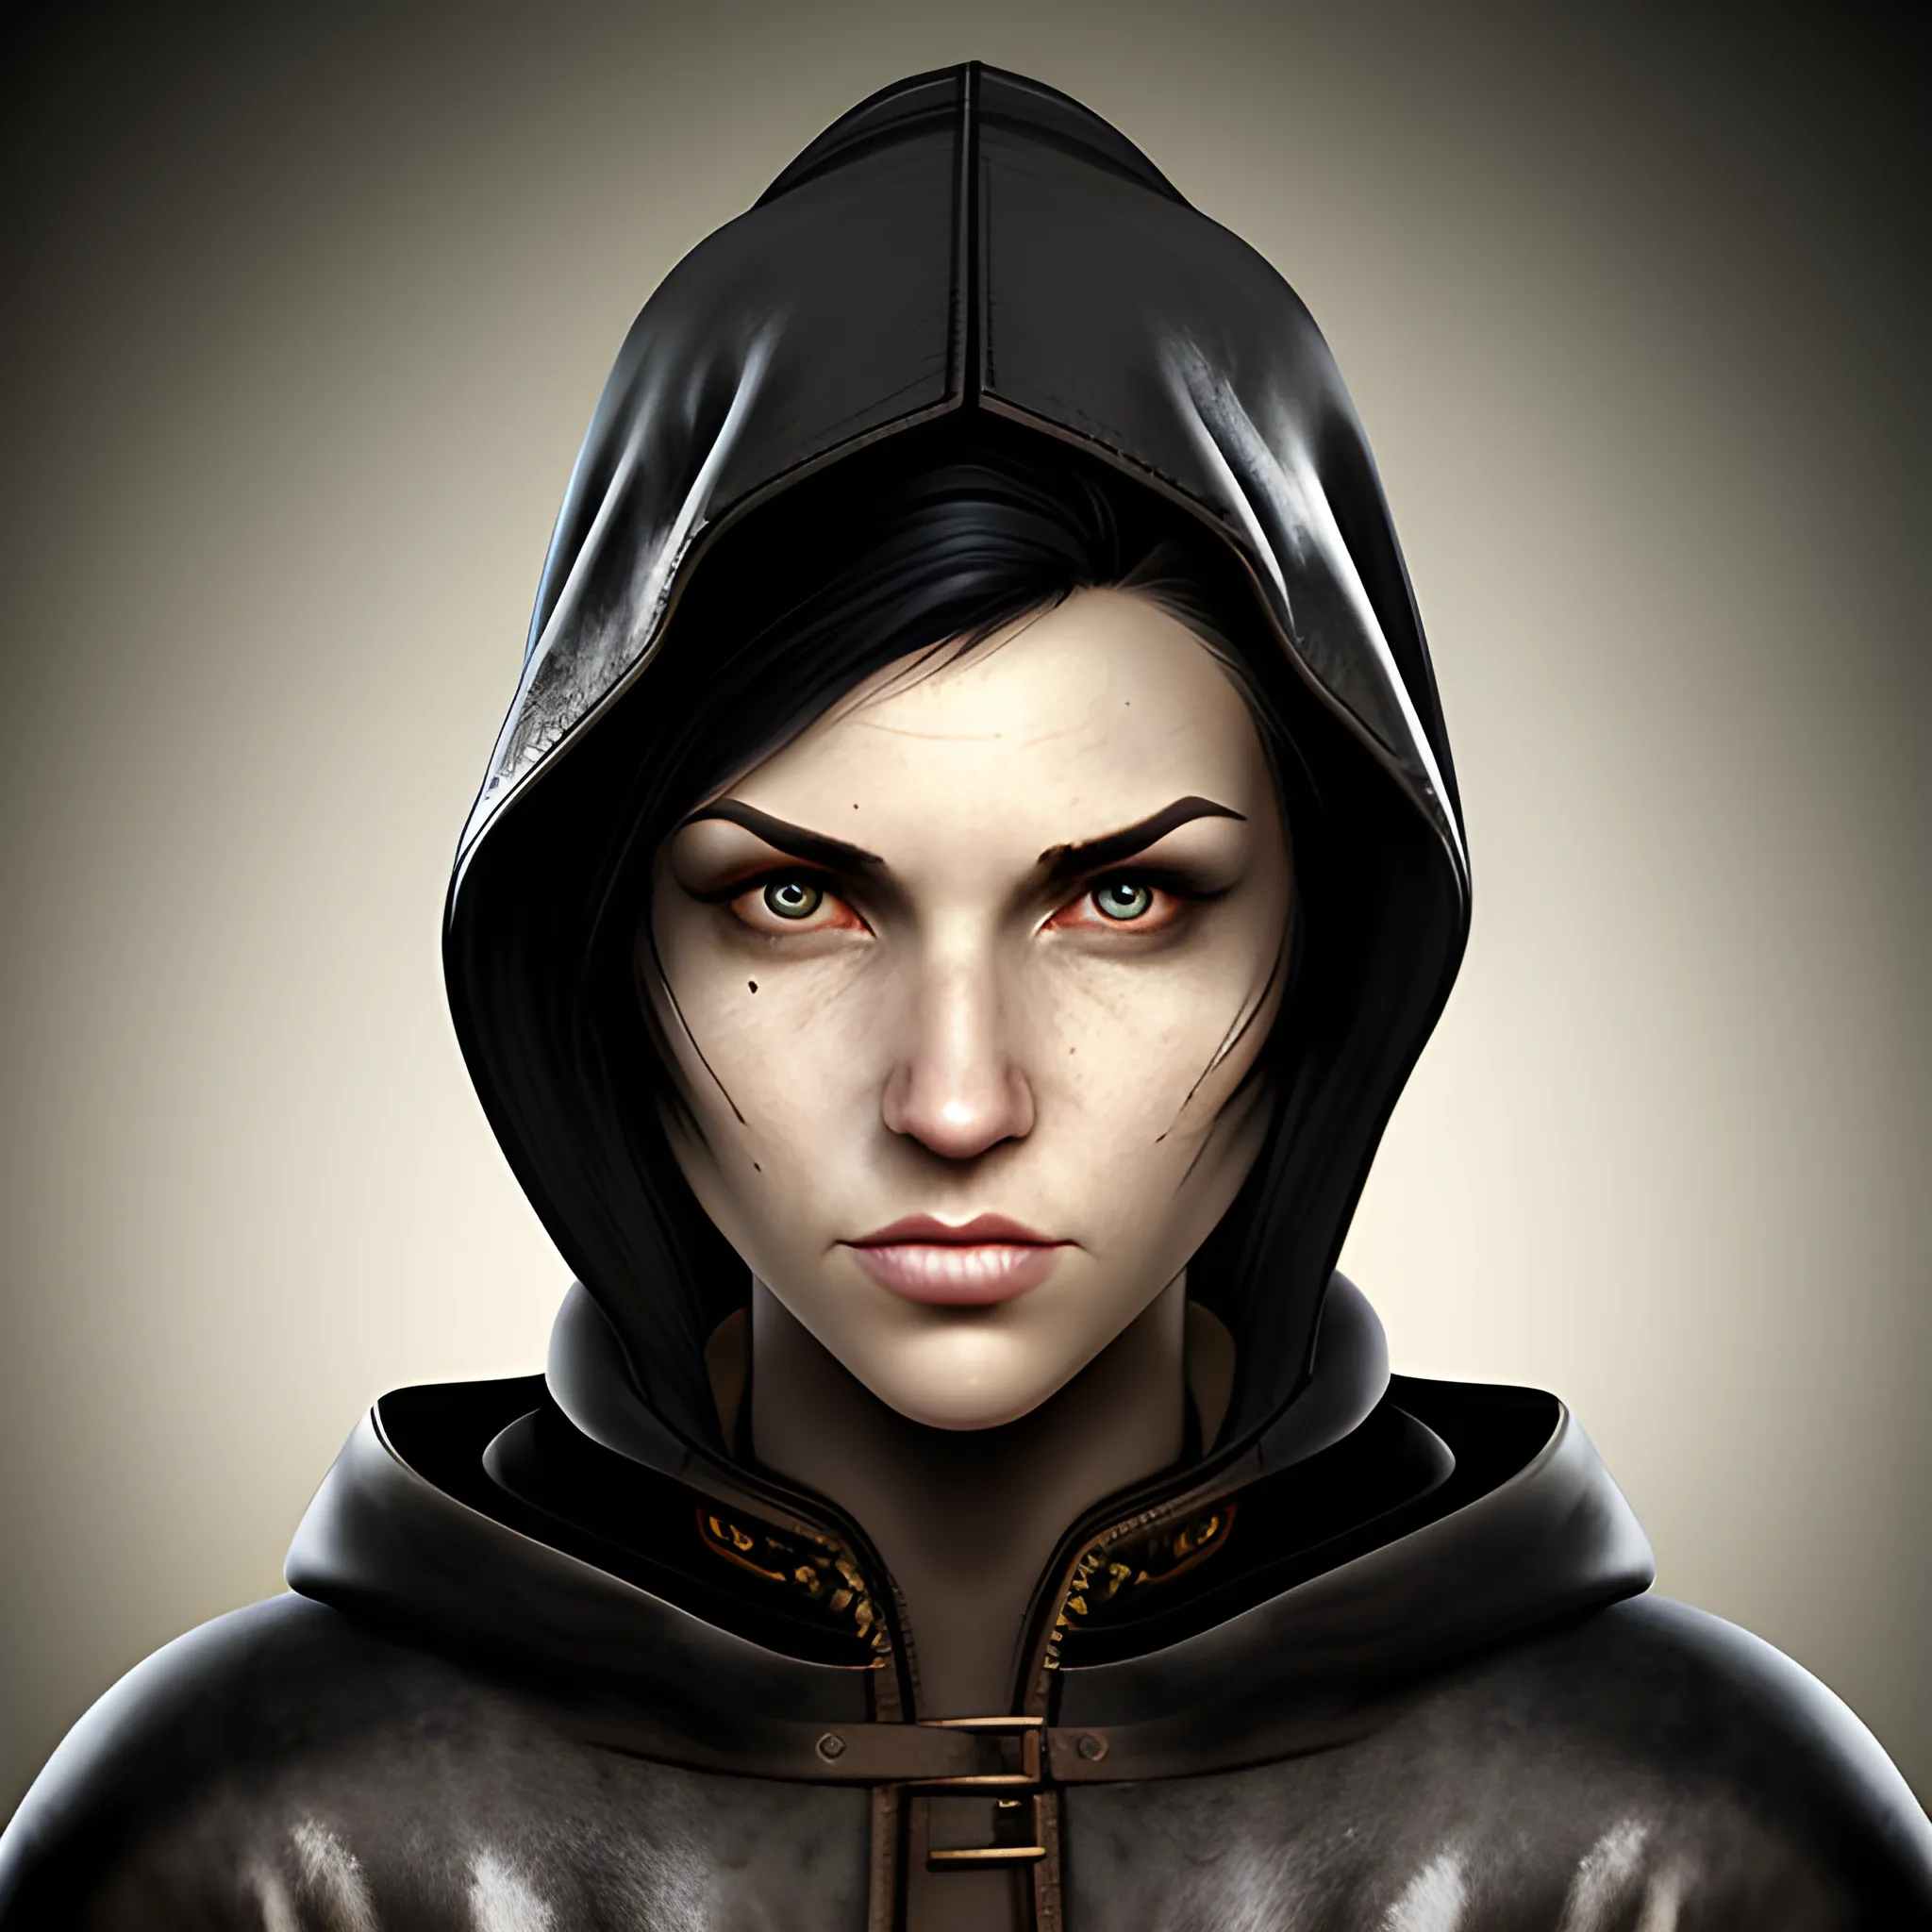 In the style of fallout 1, (masterpiece), (portrait photography), (portrait of an adult Caucasian female), no makeup, flat chested, leather cloak, hood on, ponytail hairstyle, black hair, black eyes